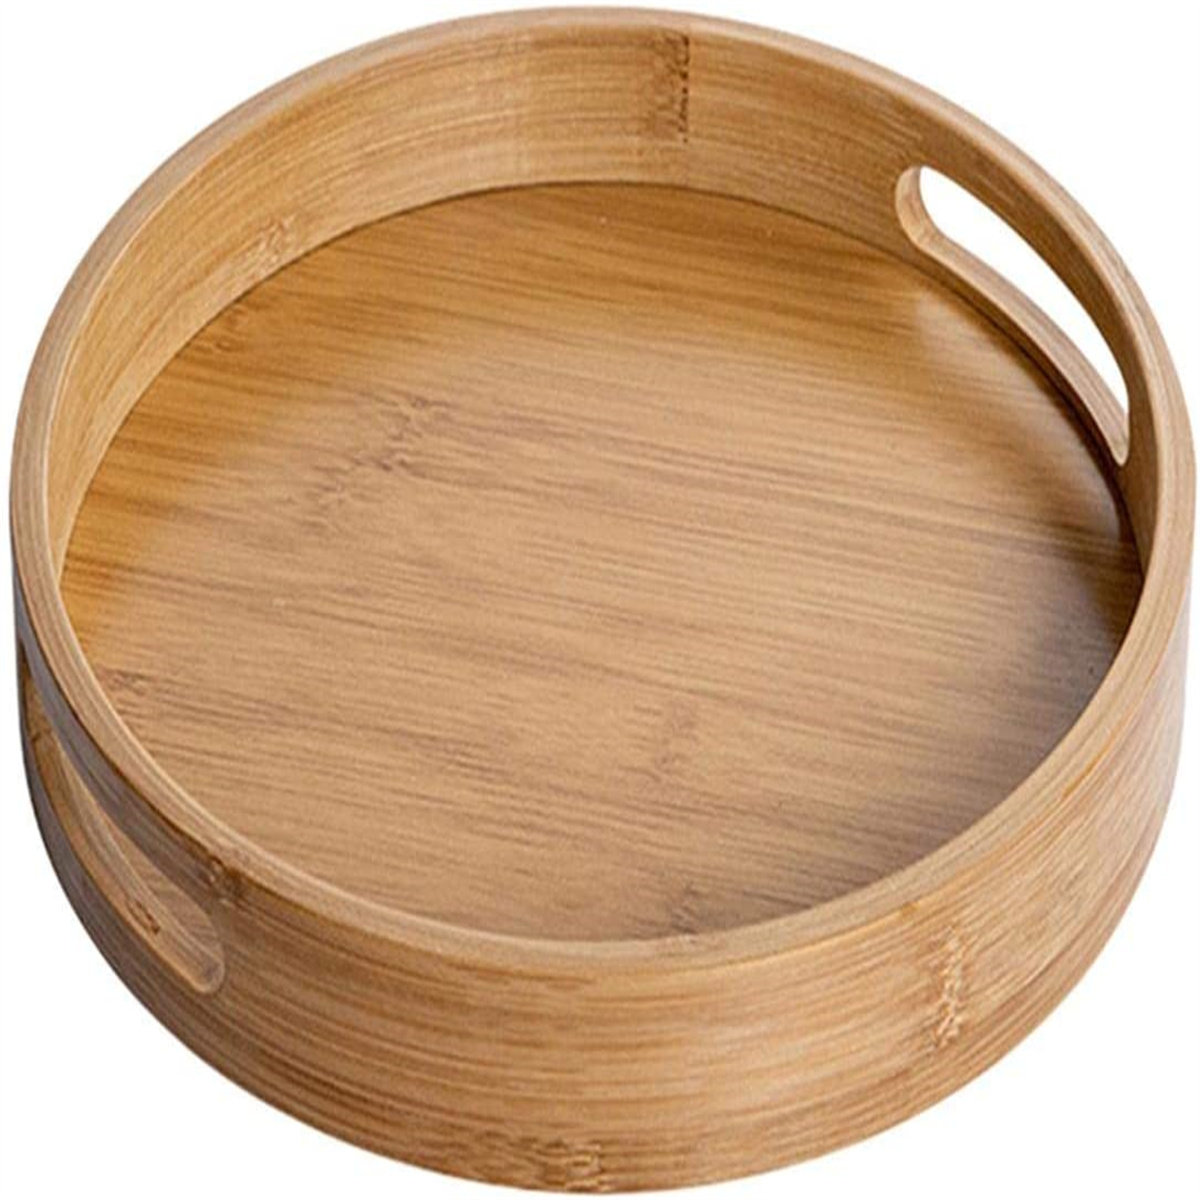 Bamboo Wood Round Tray W Handles, Tea Coffee Table Decorative Serving Tray  Food Storage Platters For Serving Beverages & Food On Bar Living Room Home 